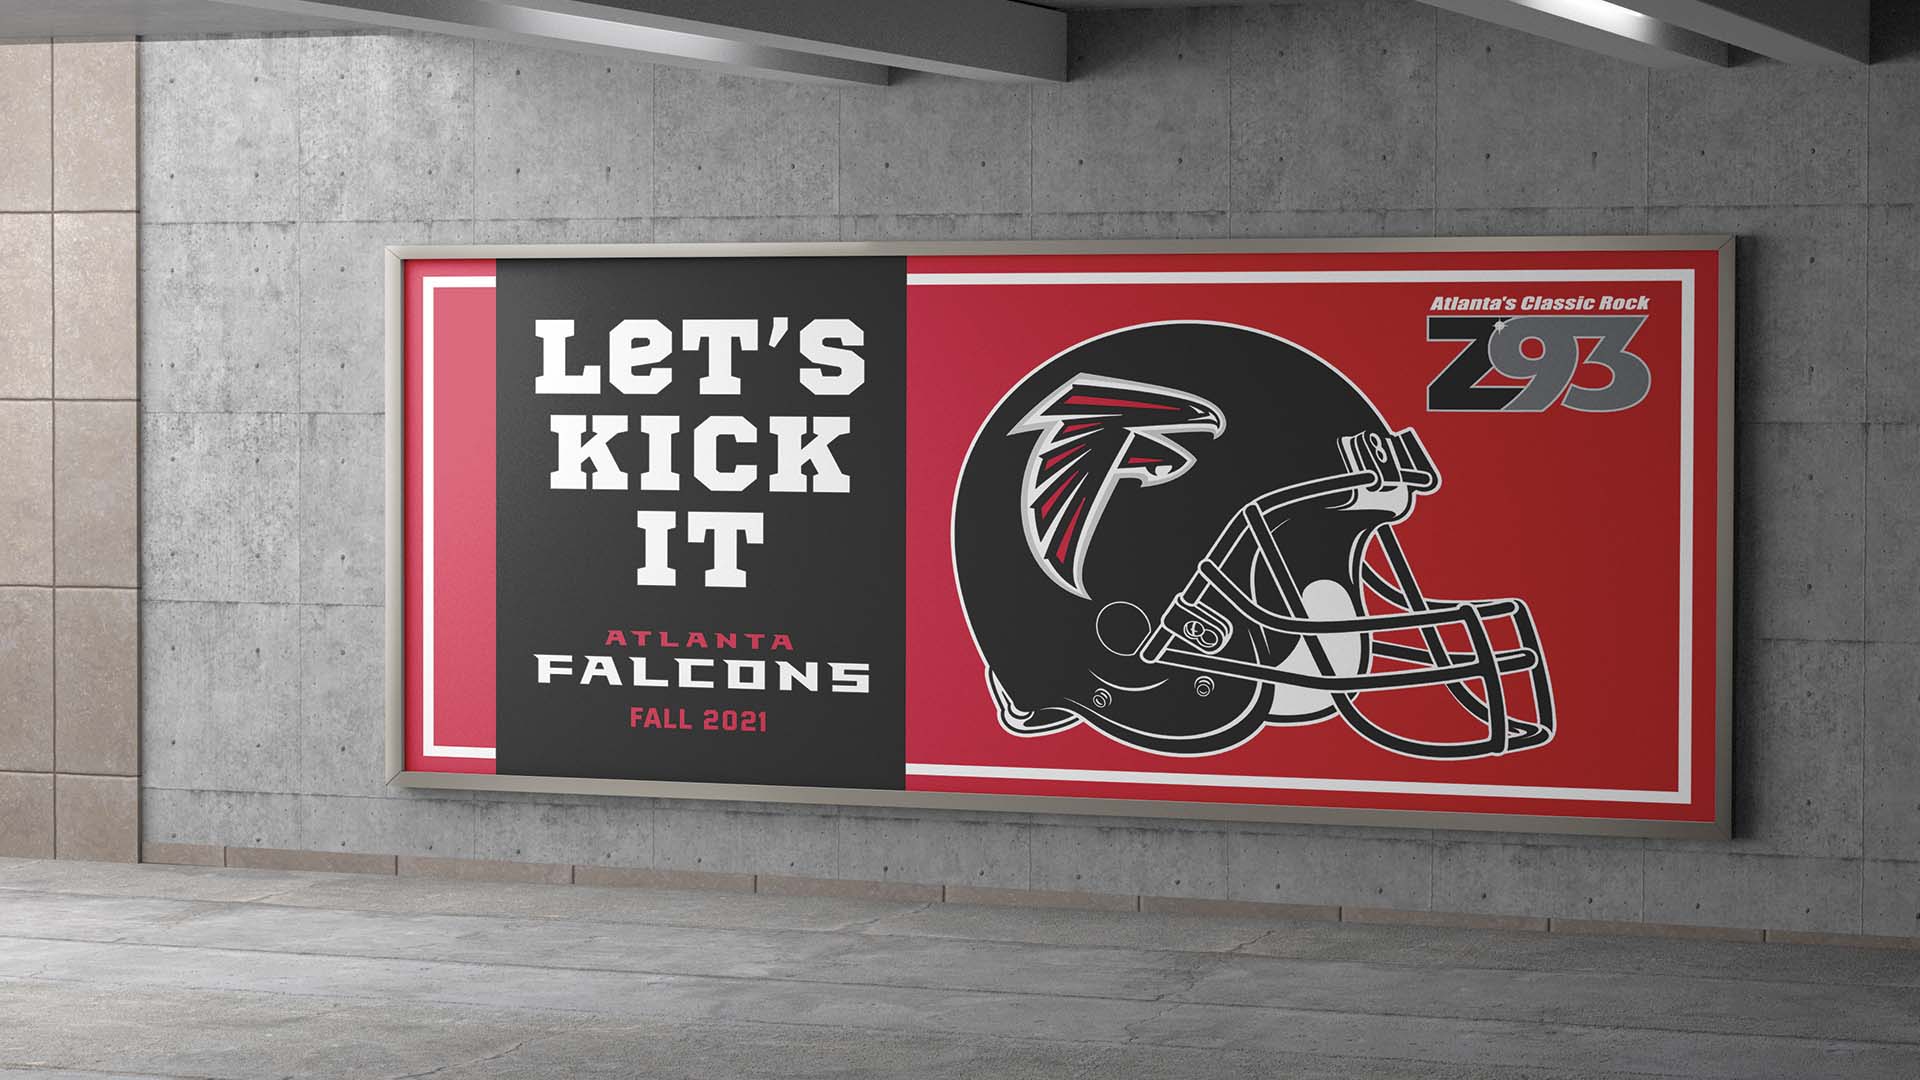  / “Let’s Kick It”'; Billboard Advertisement, 28 x 11 feet print ad, 2021. Subway advertisement created in collaboration with Z93 to encourage local involvement and interest in the Atlanta Falcons’ 2021 football season. 
Caption
